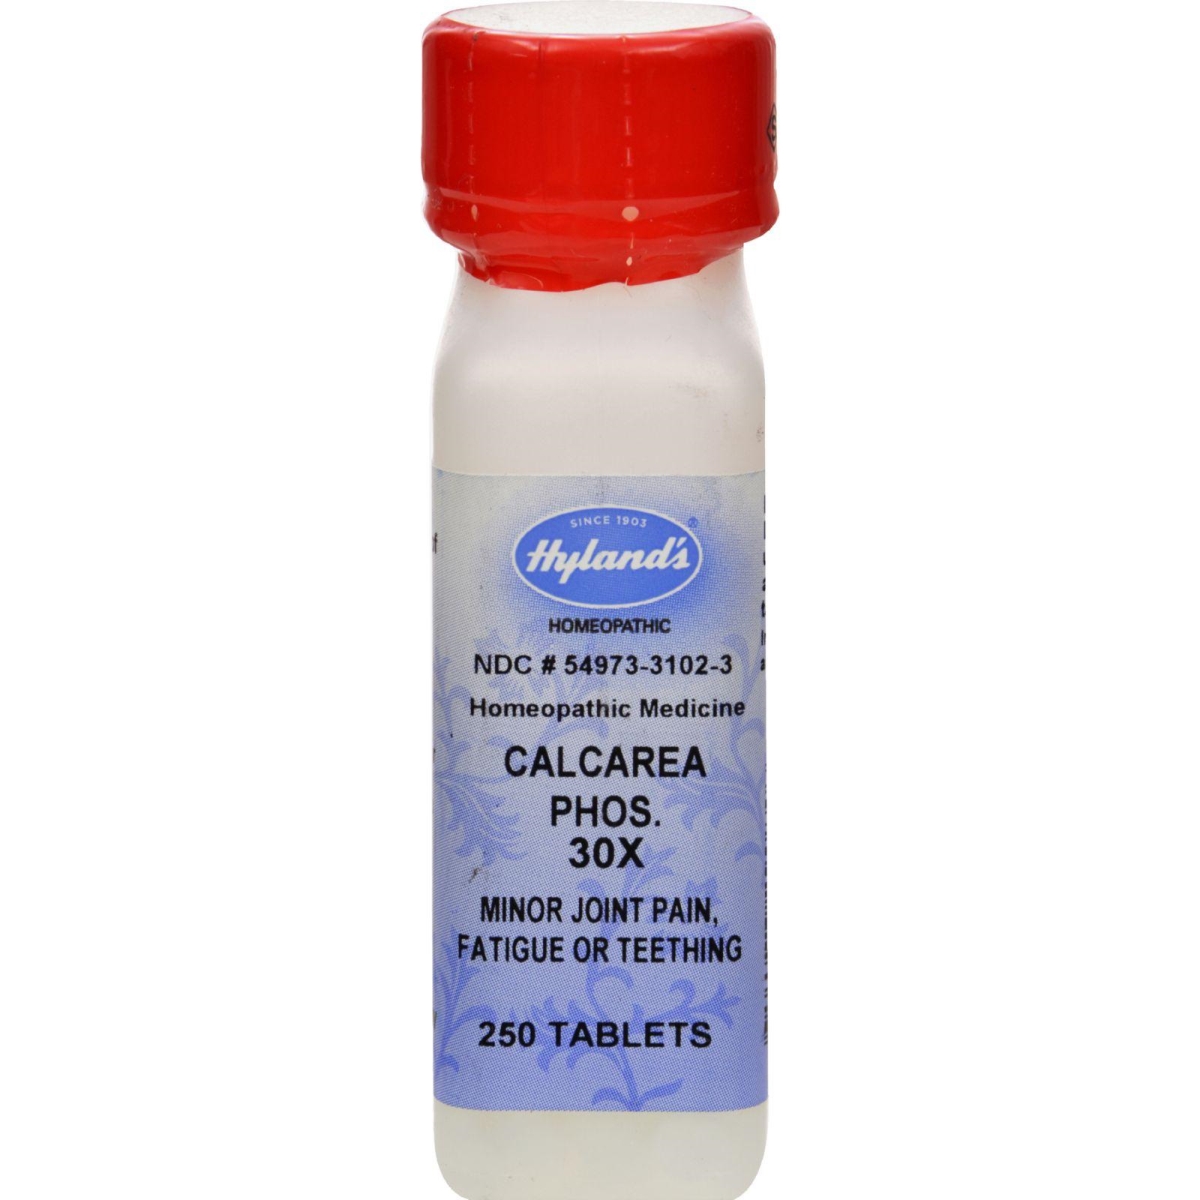 Hg0129882 Homeopathic Calcarea Phos 30x, 250 Tablets